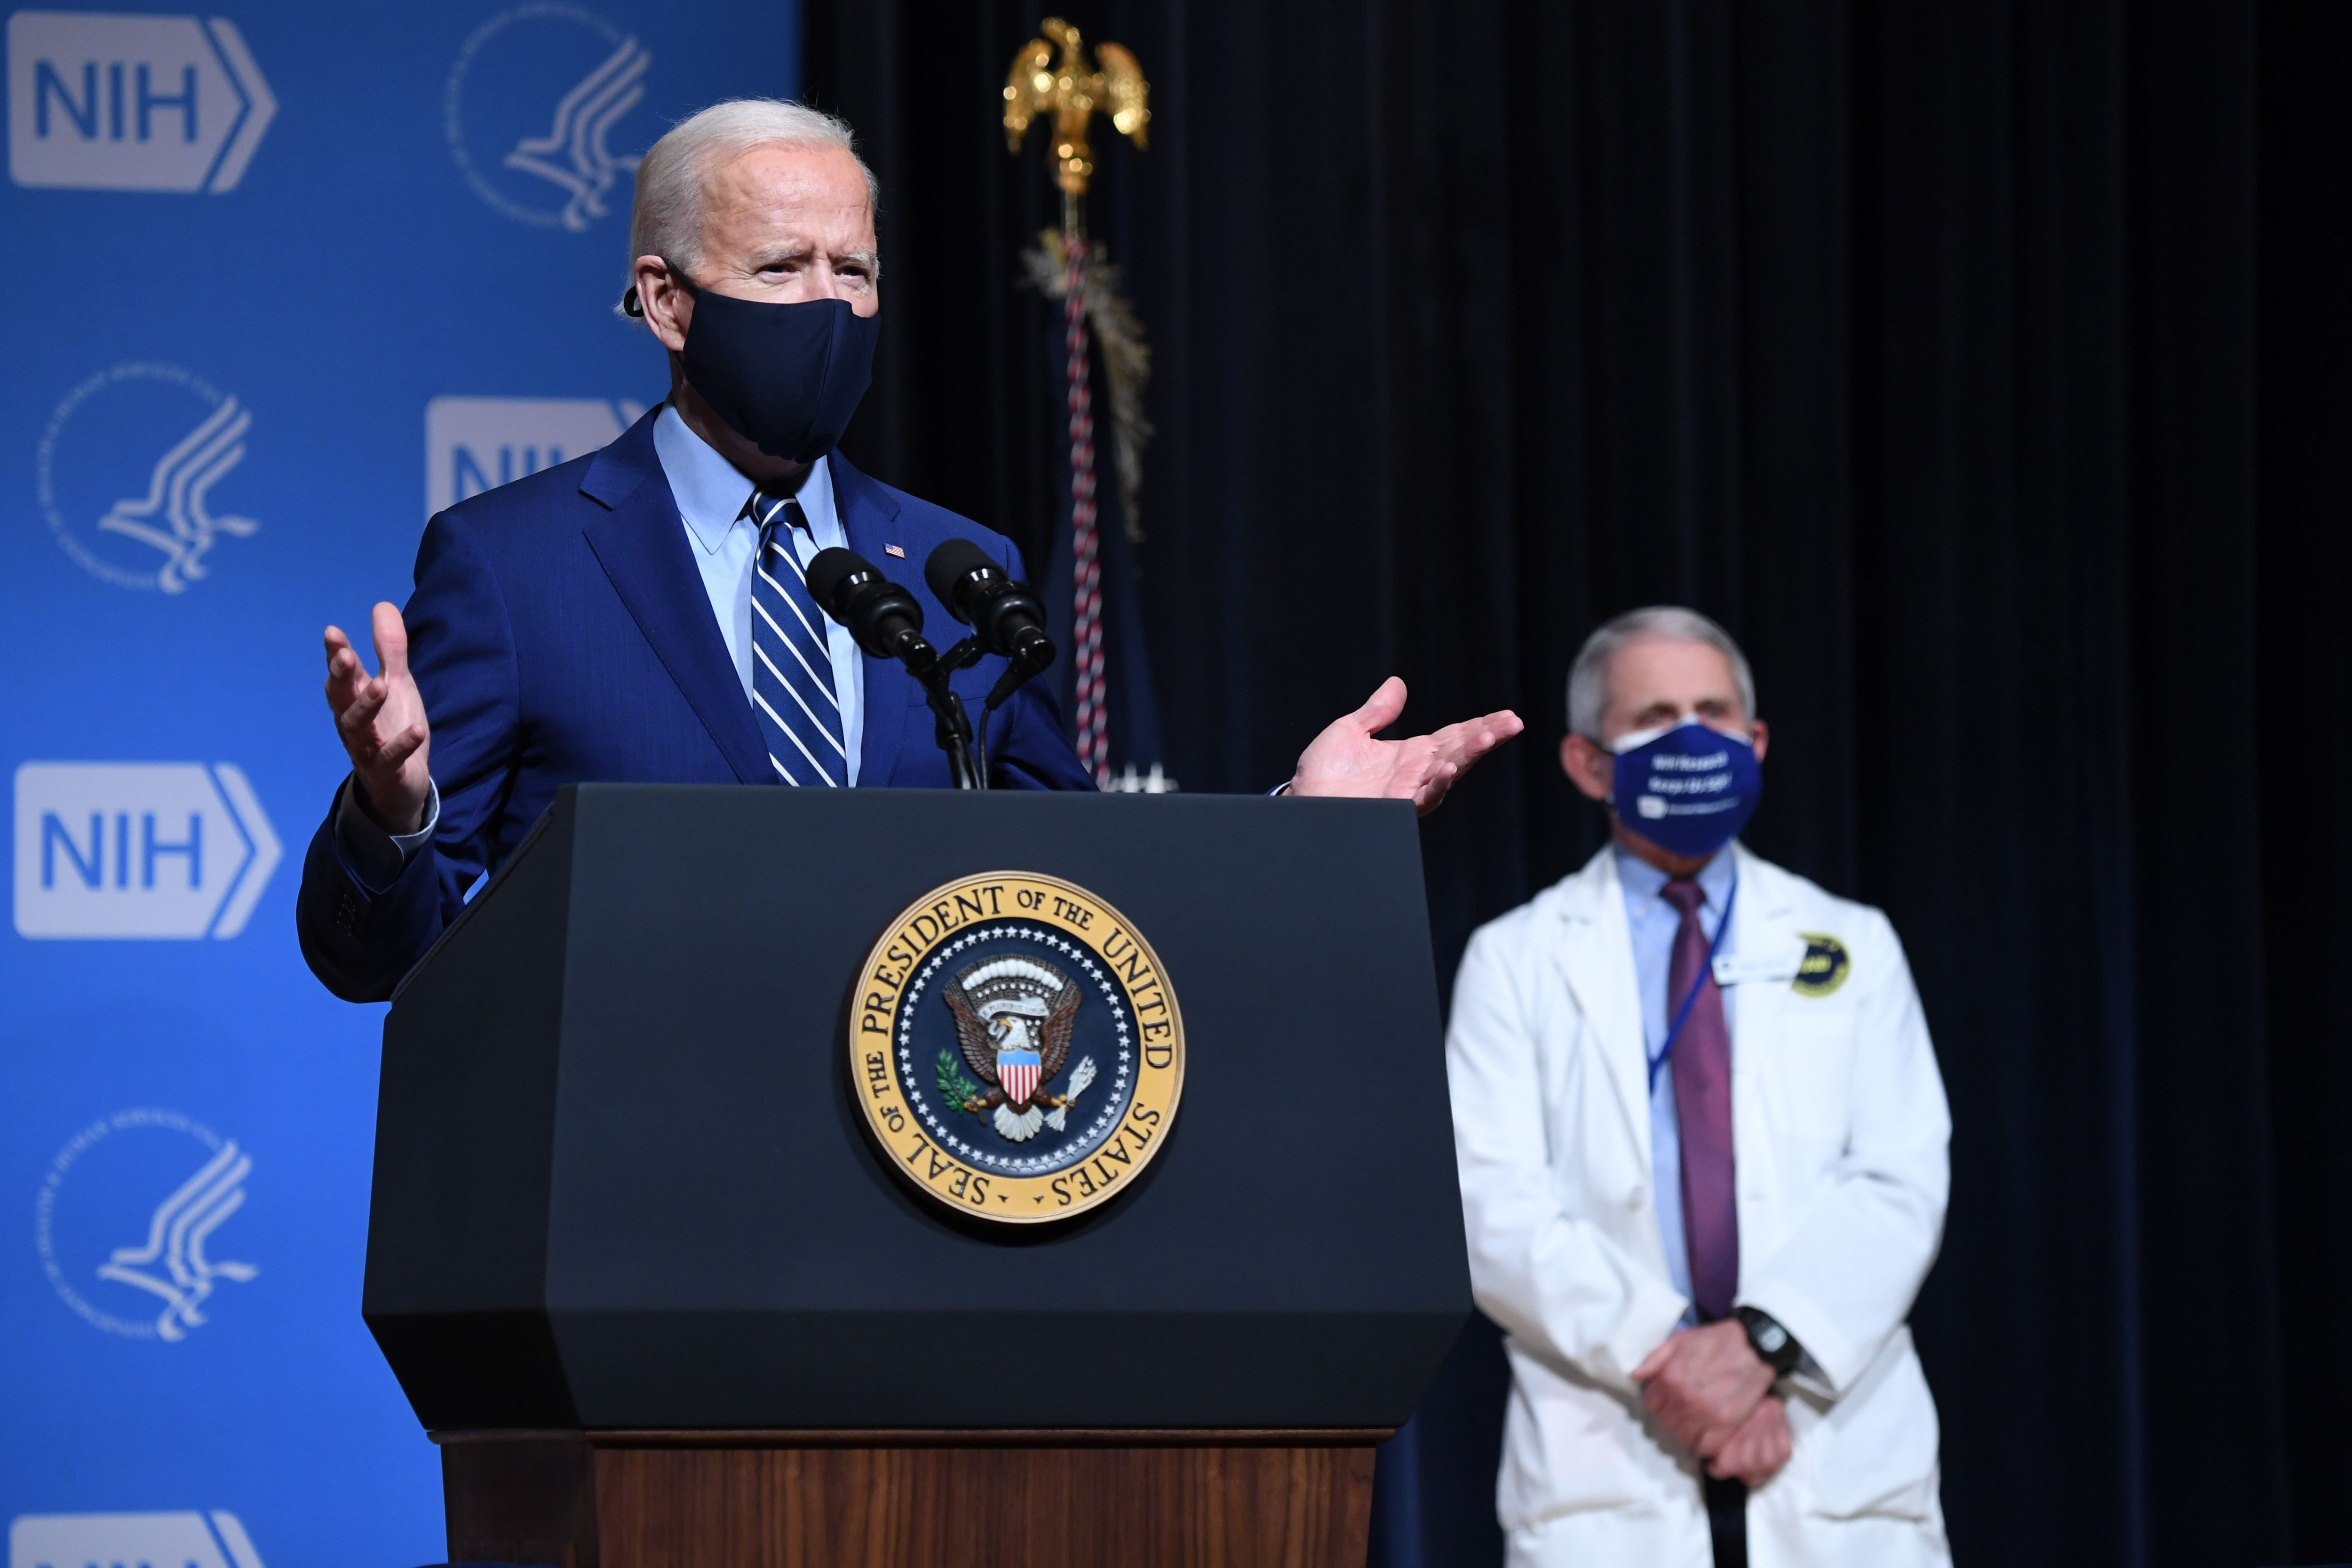 President Joe Biden, flanked by White House Chief Medical Adviser on Covid-19 Dr. Anthony Fauci during a visit to the National Institutes of Health in Bethesda, Maryland, on Feb. 11, 2021.